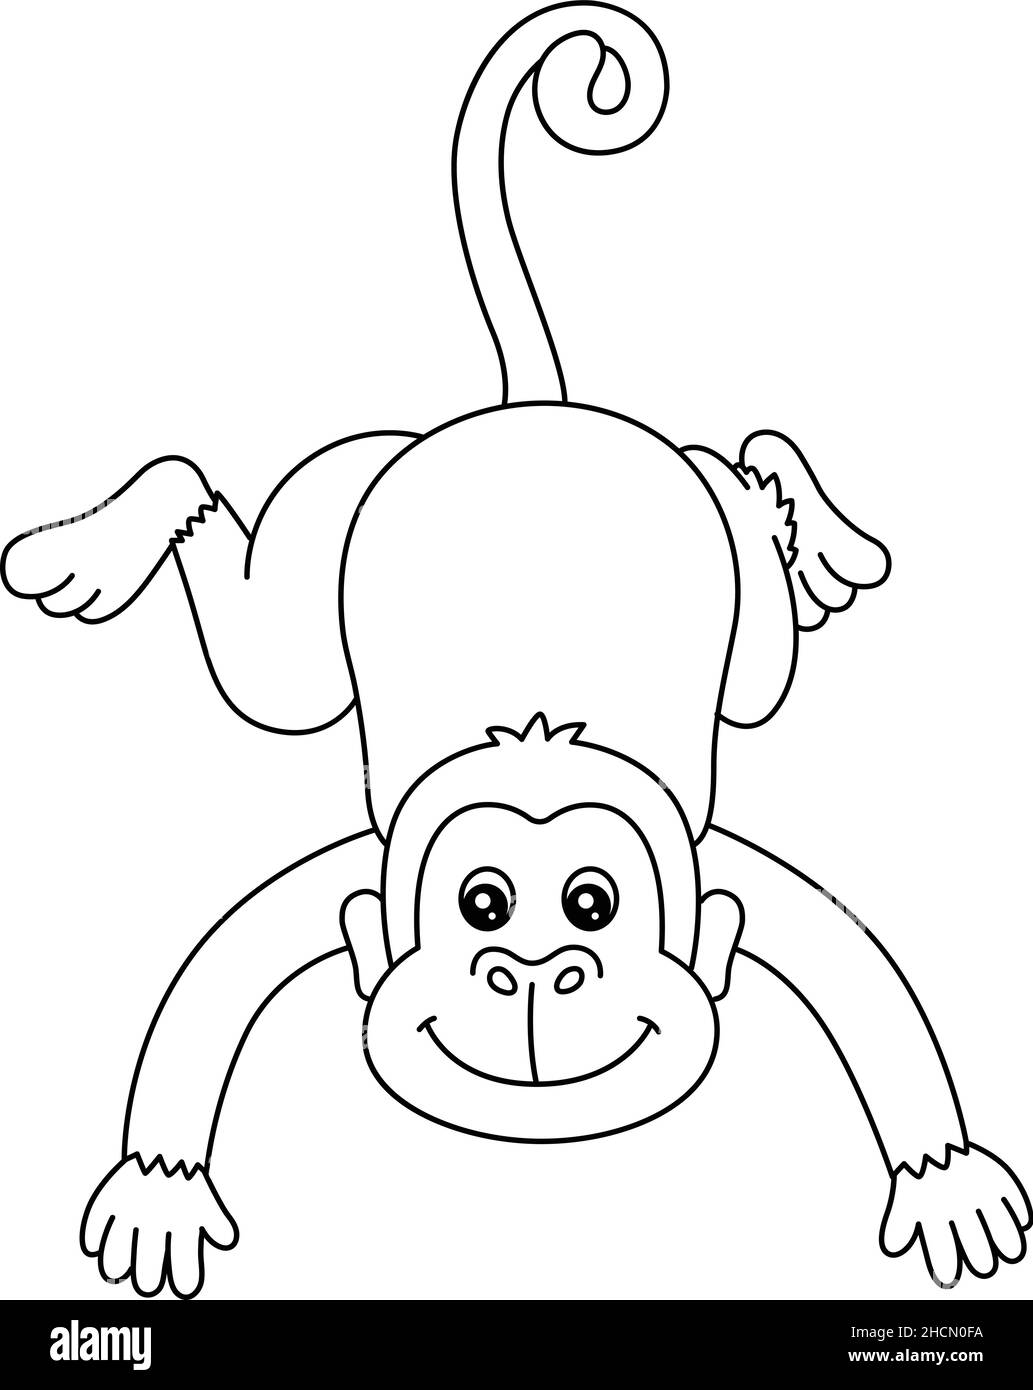 Monkey Coloring Page Isolated for Kids Stock Vector Image & Art ...